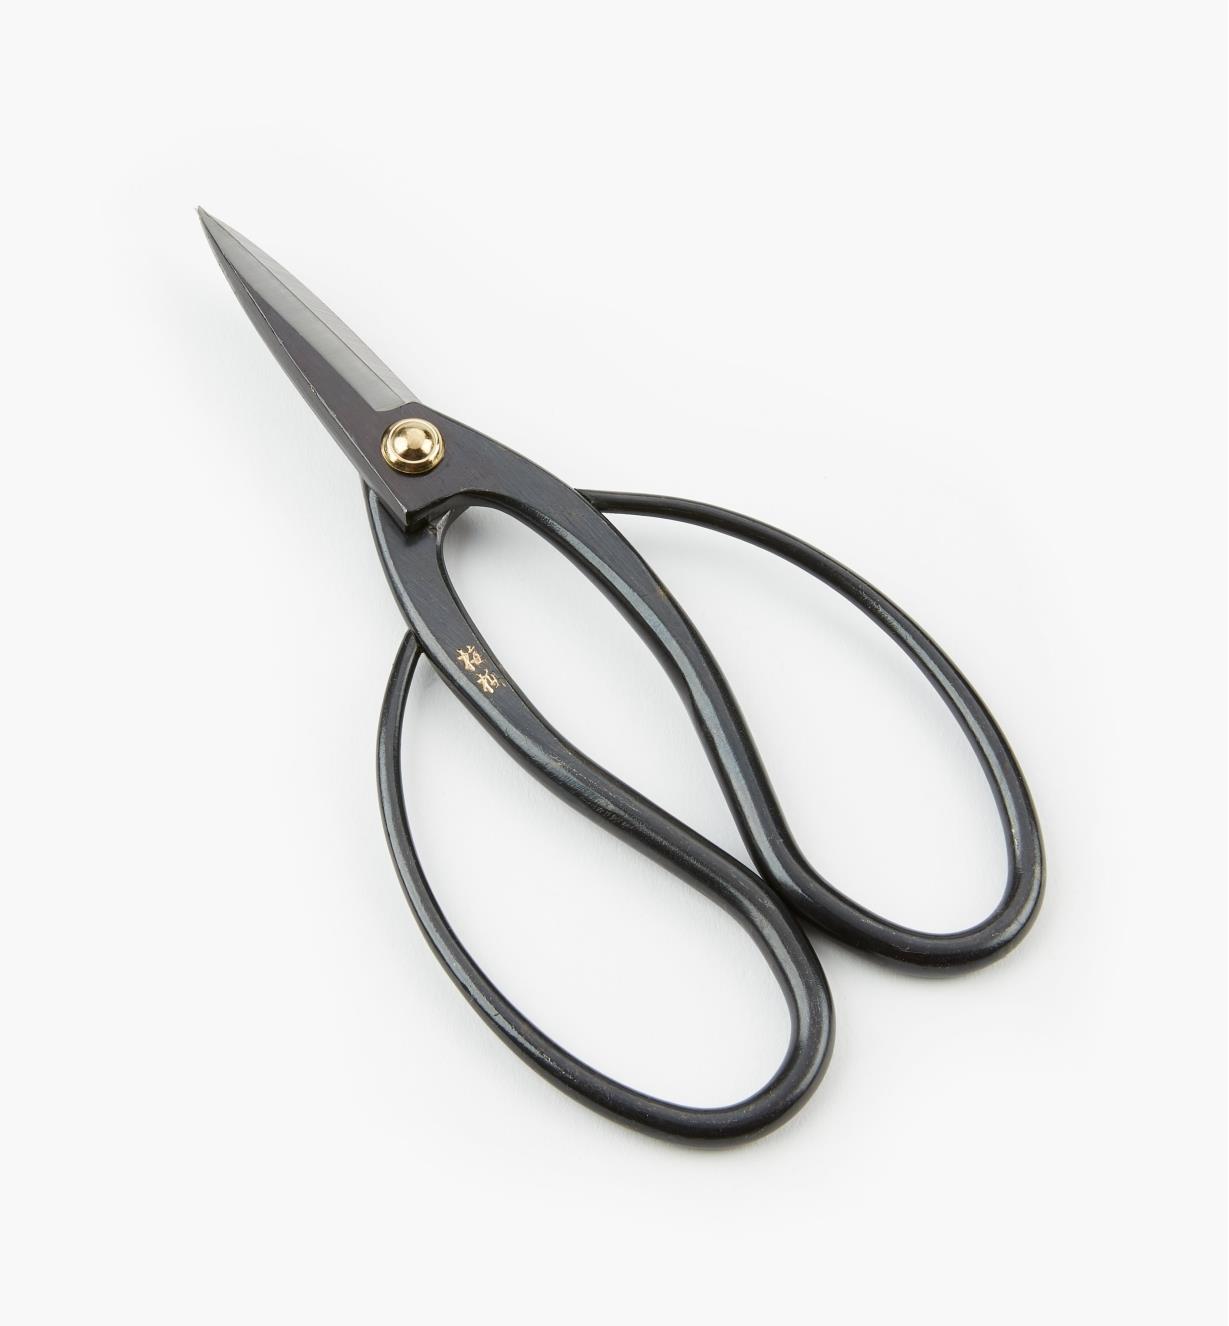 BC123 - Root-Trimming Shears